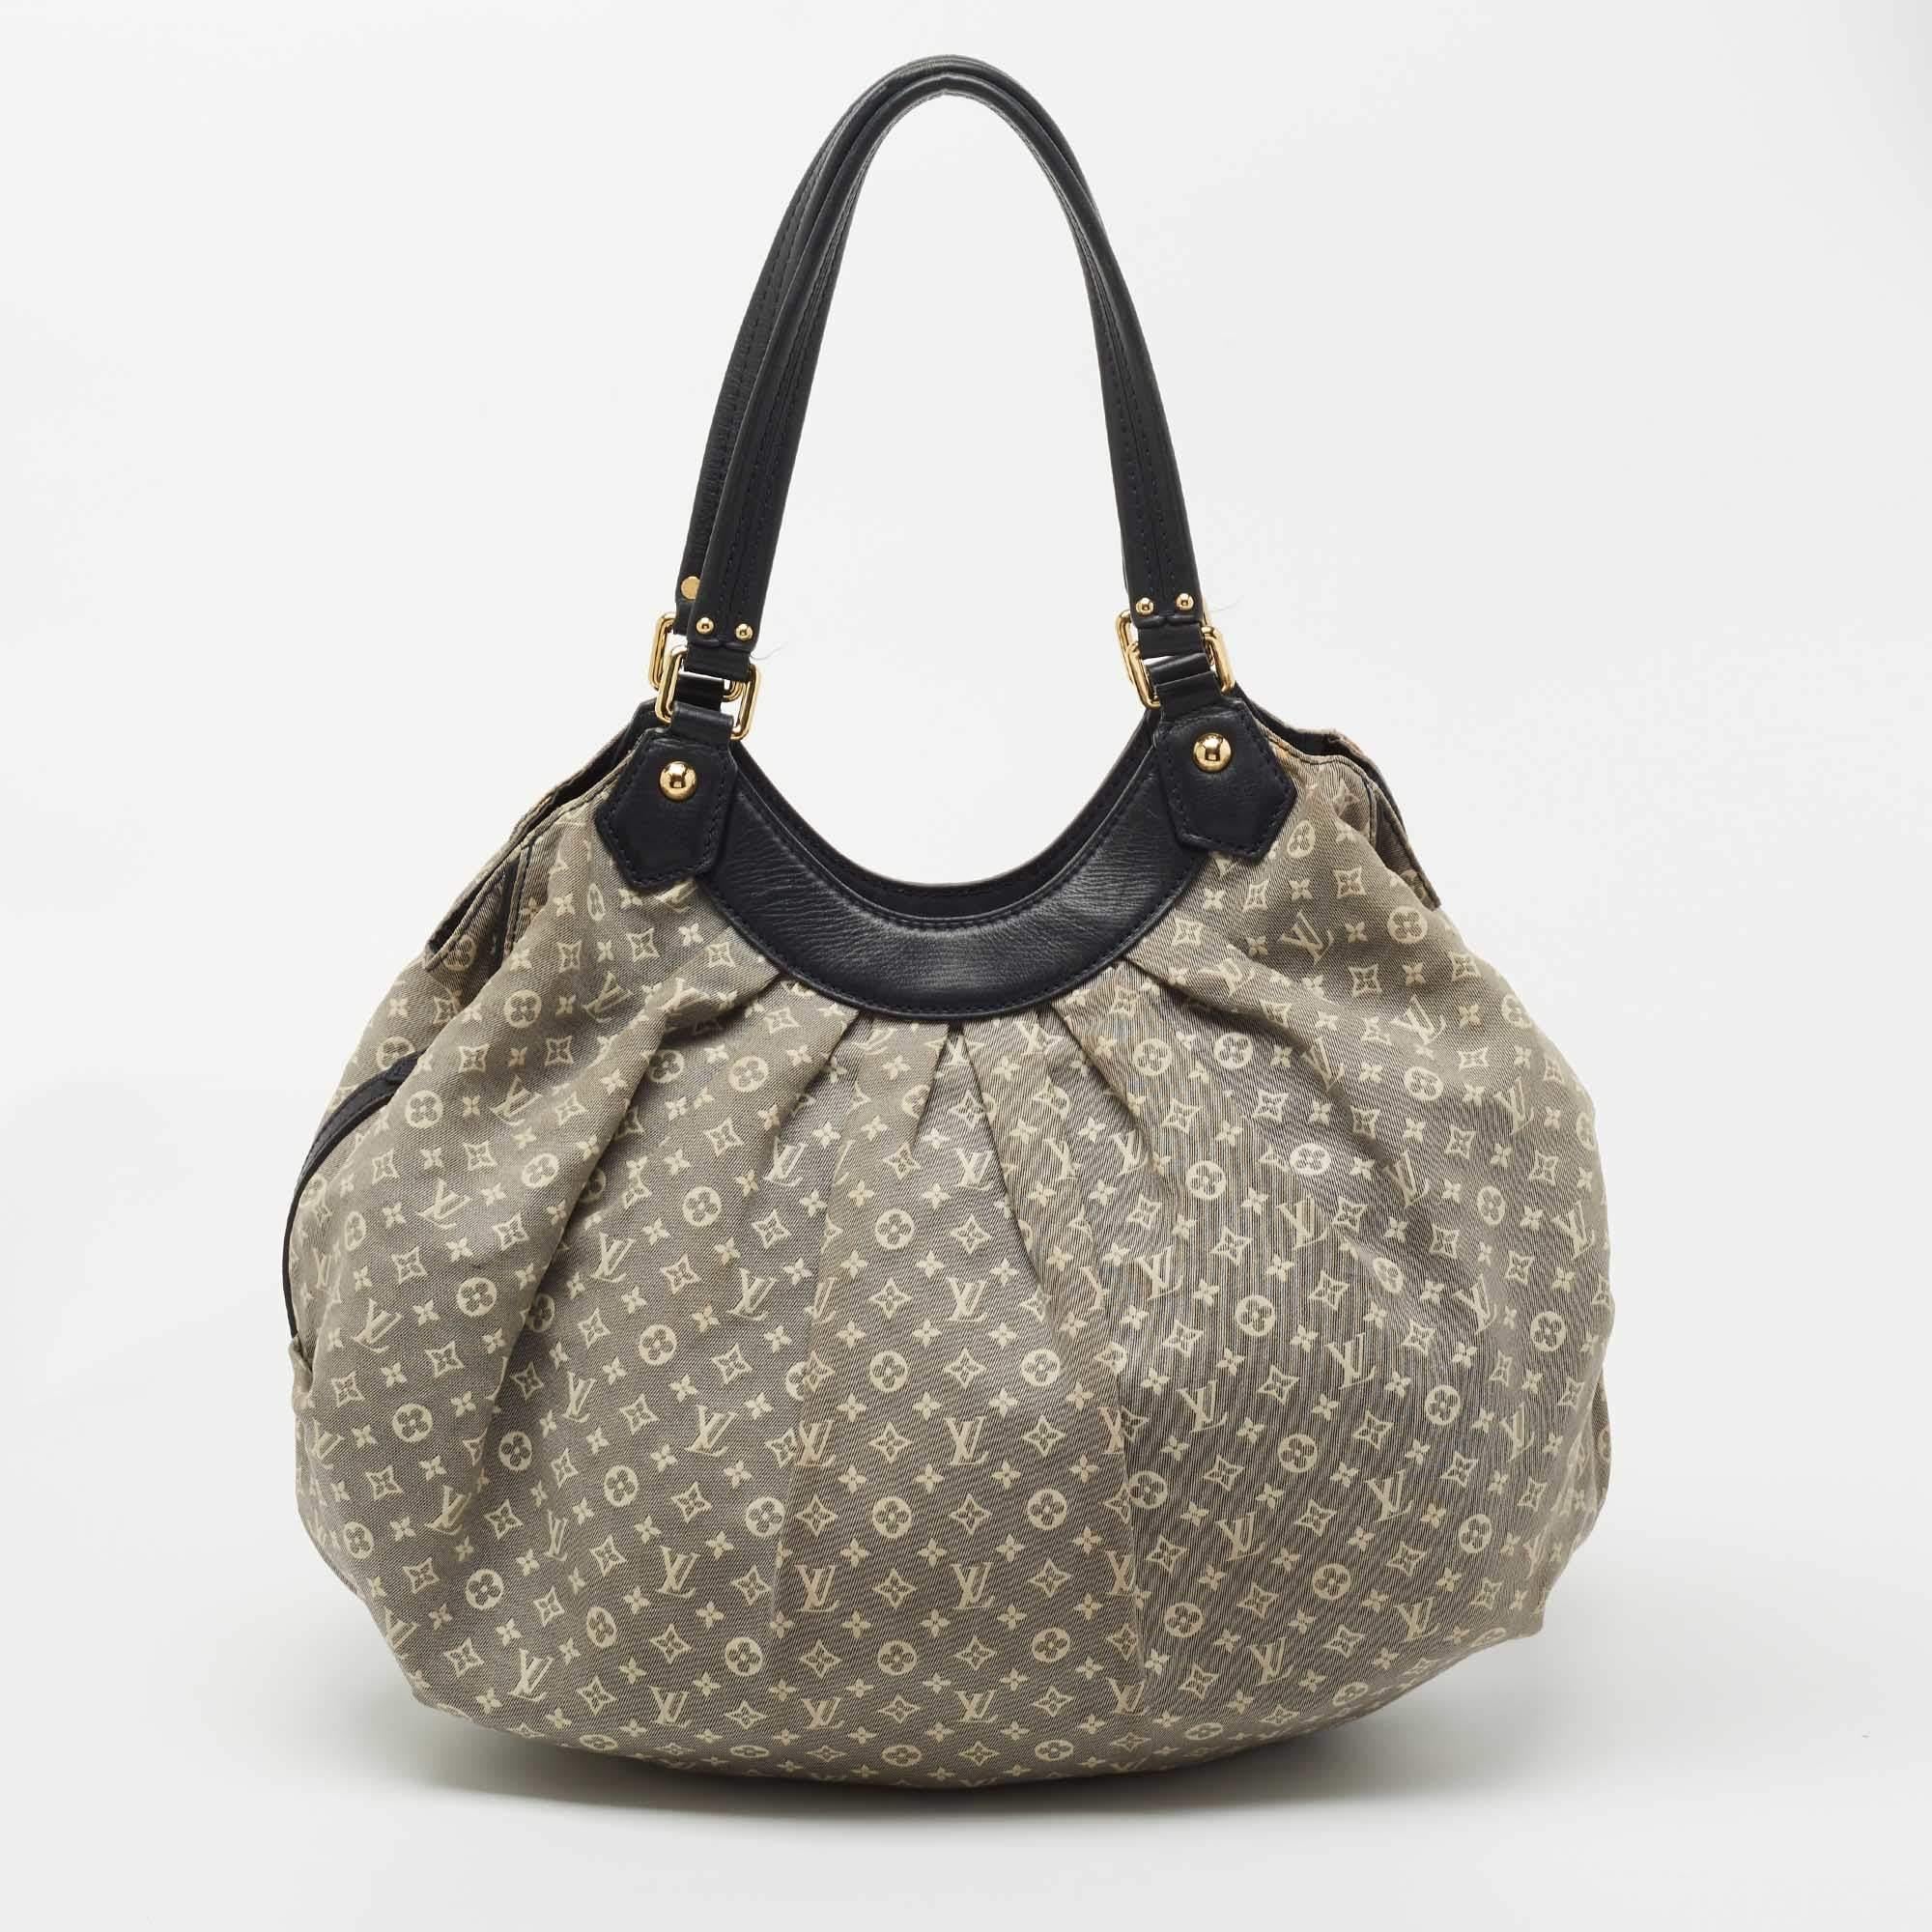 This LV bag for women is carefully crafted to offer you a luxurious accessory you will cherish. It is marked by high quality and enduring appeal. Invest in it today!

